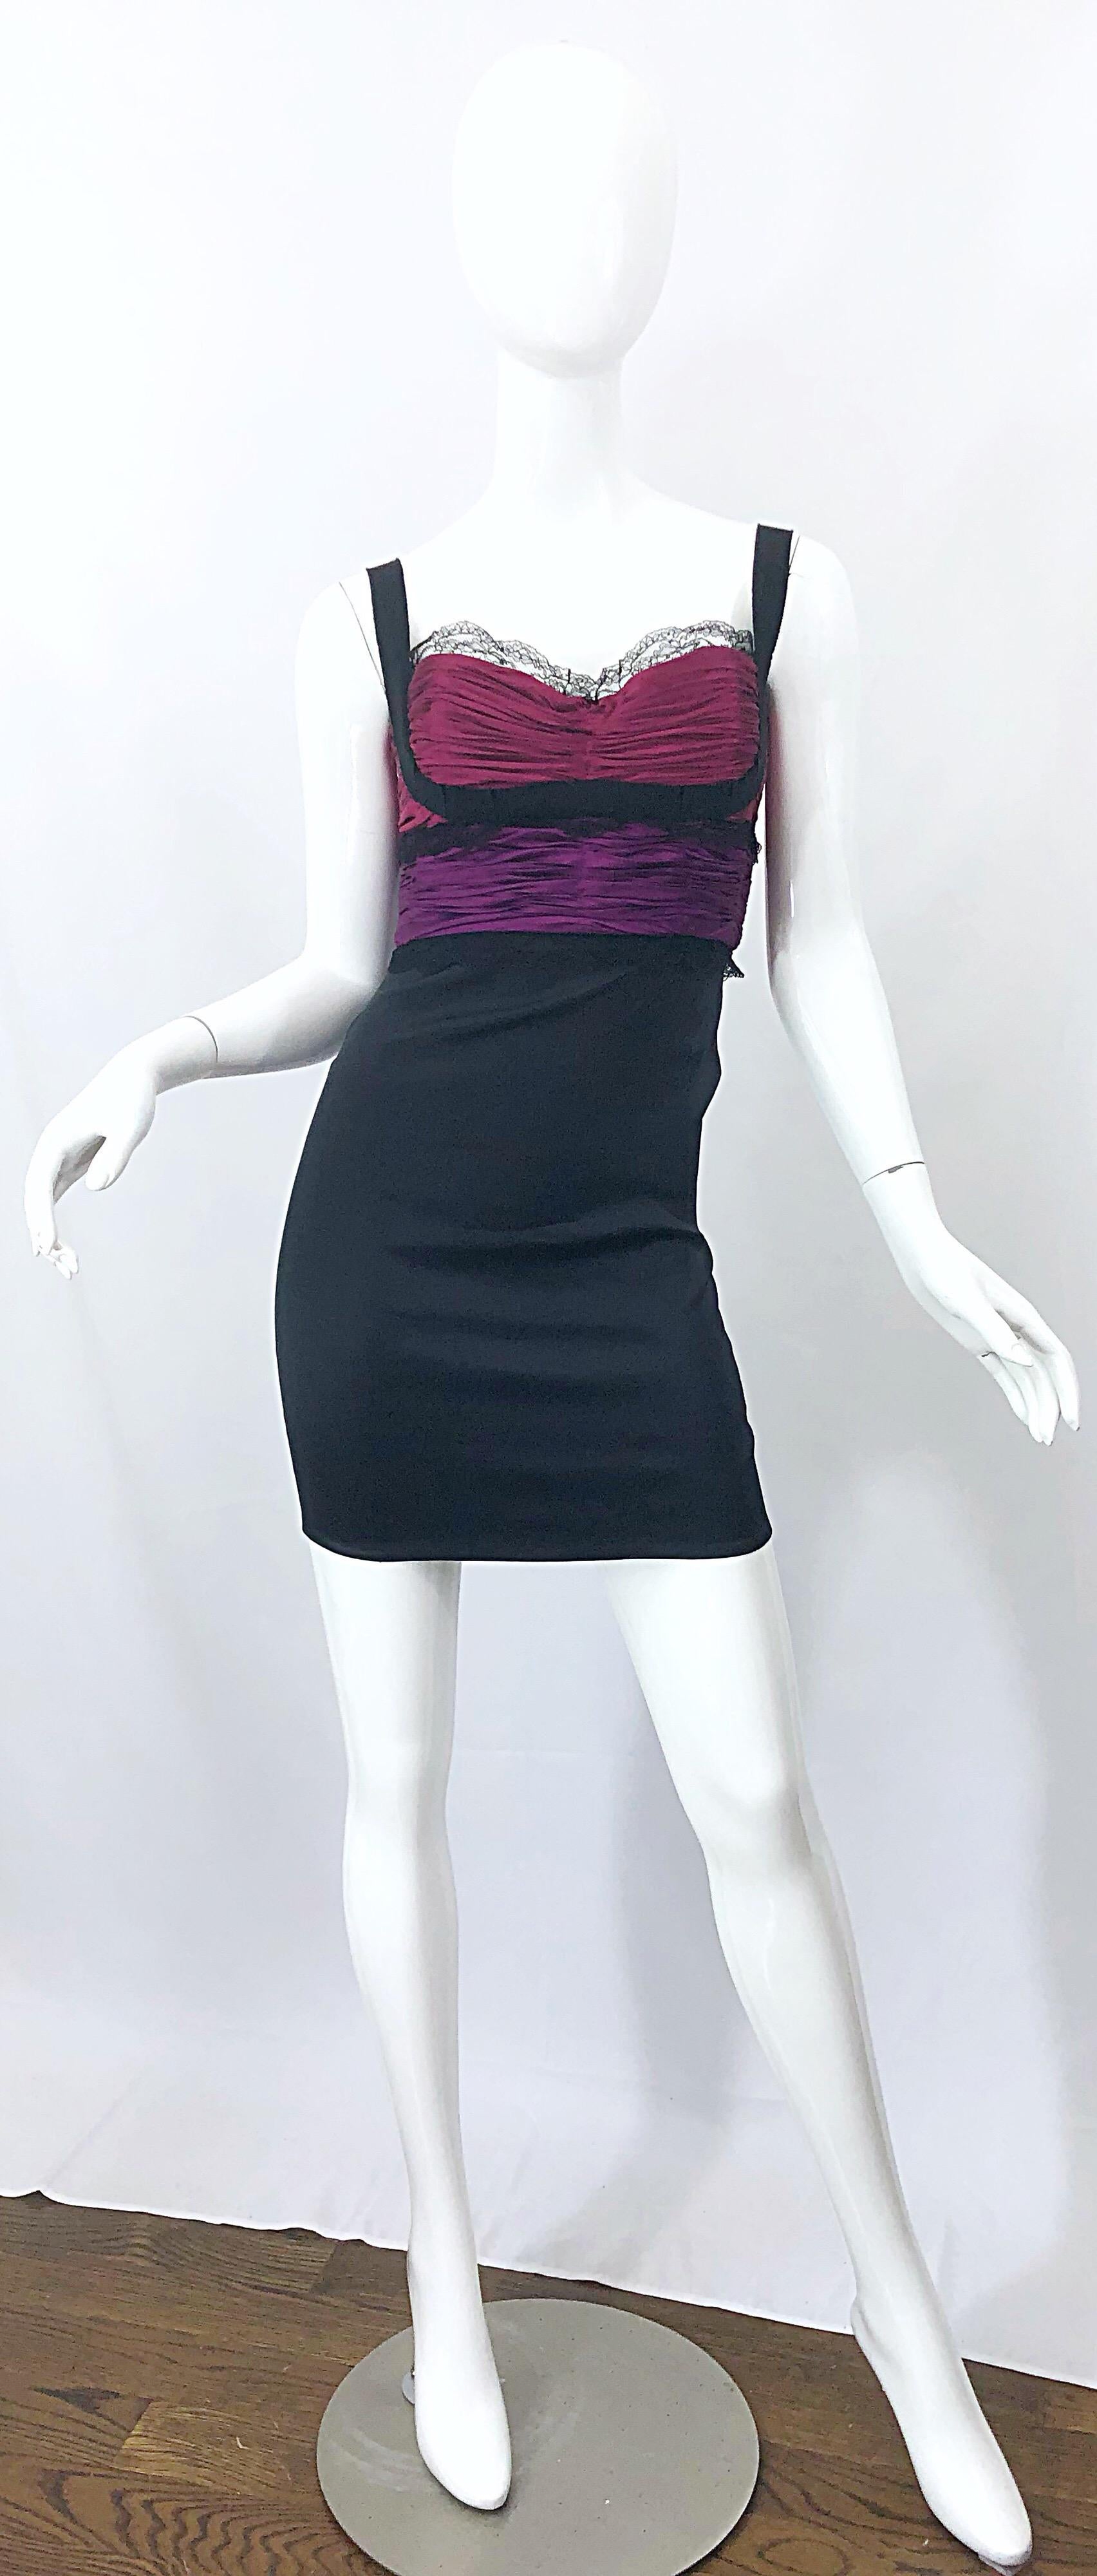 Sexy early 2000s ROBERTO CAVALLI silk and lace mini dress! Features fuchsia / purple, hot pink and black liquid silk, and black lace. Ruched bodice also features black grosgrain silk ribbon accents. Hidden zipper up the back with hook-and-eye